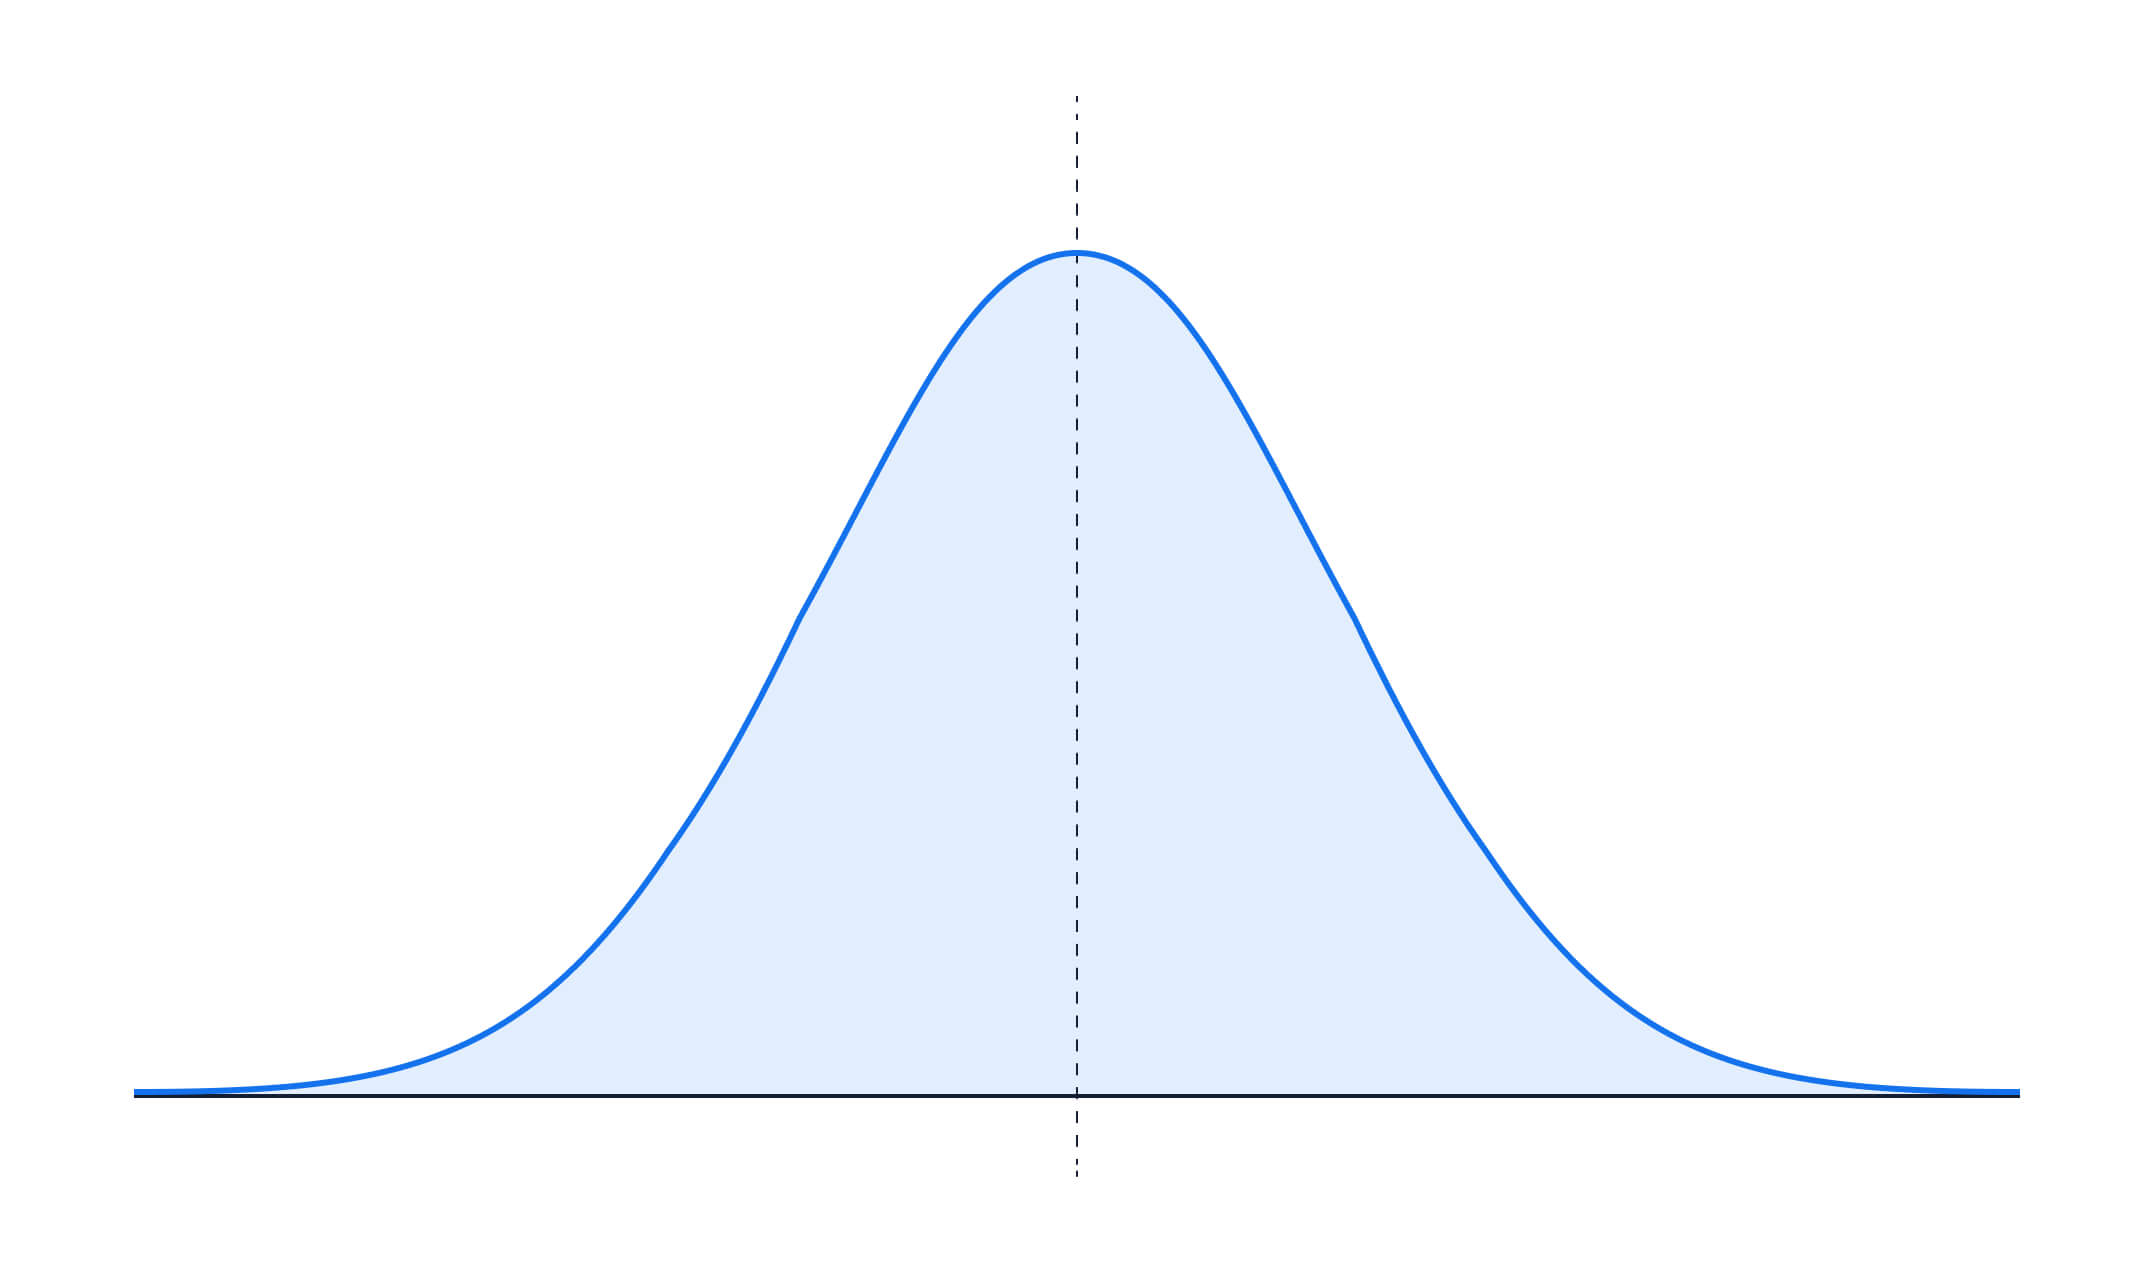 A graph with a Gaussian/normal distribution, it has a peak at the center, then falls off relatively sharply and symmetrically on either side. 